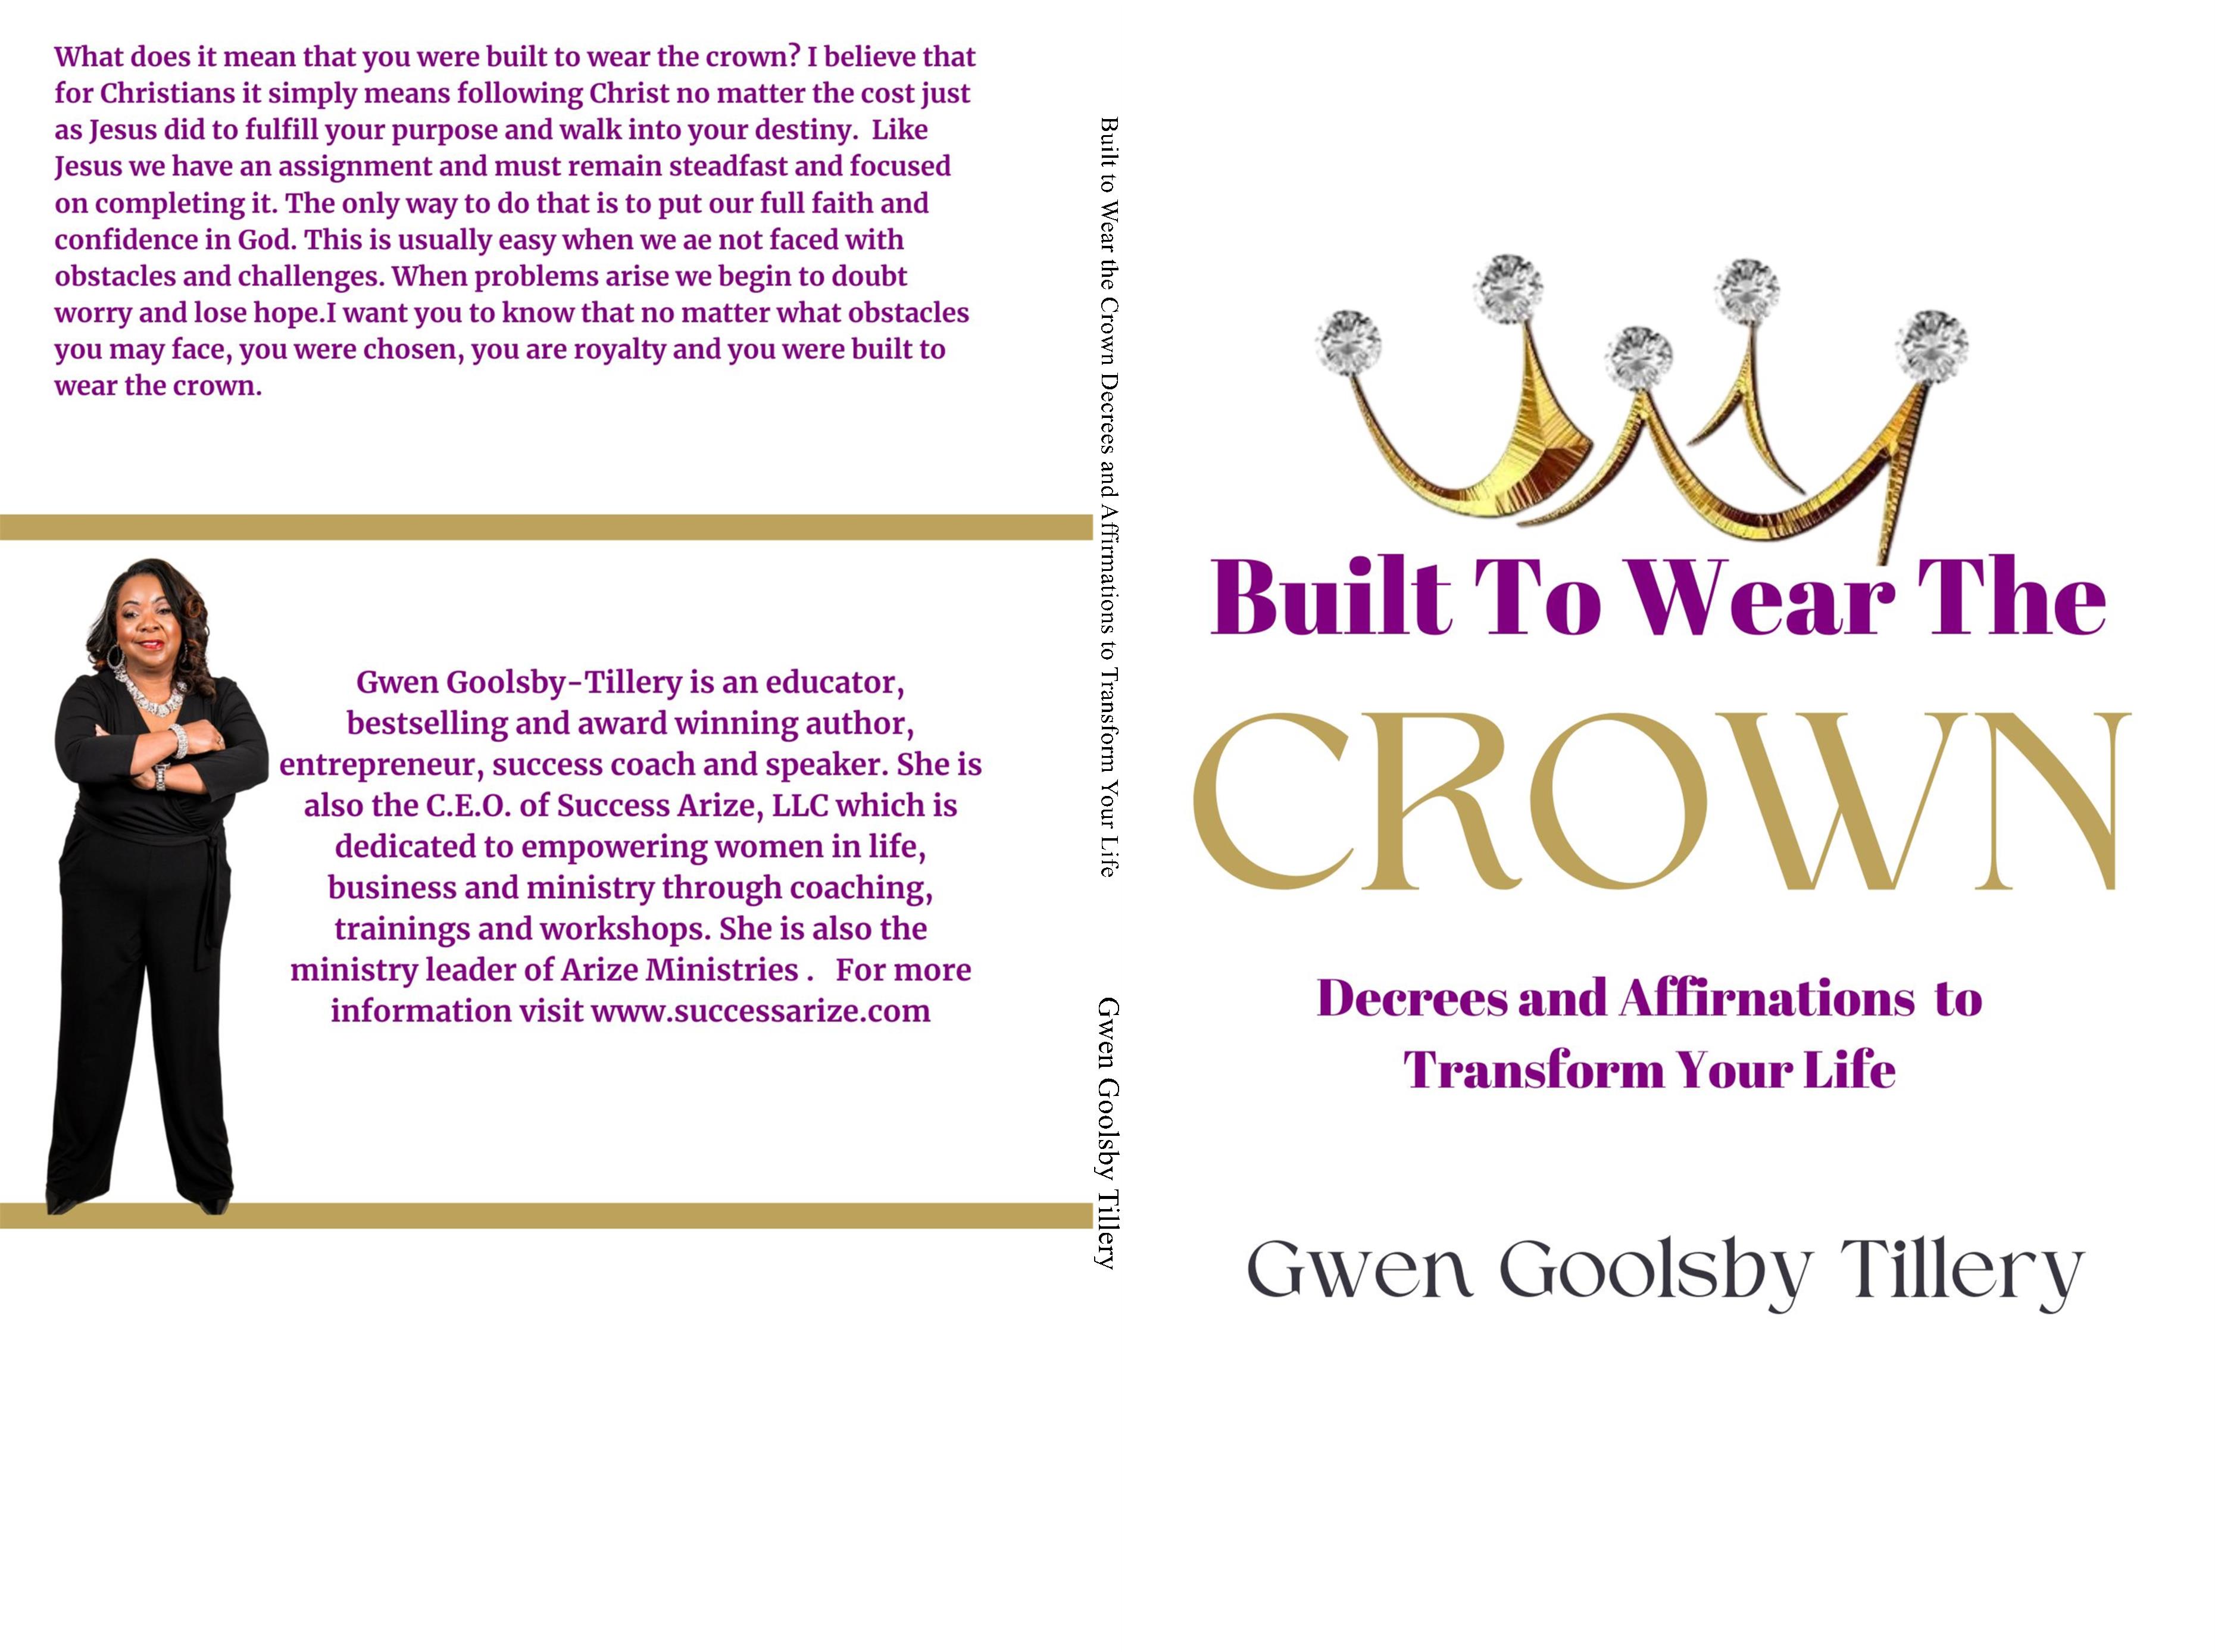 Built to Wear the Crown Decrees and Affirmations to Transform Your Life cover image